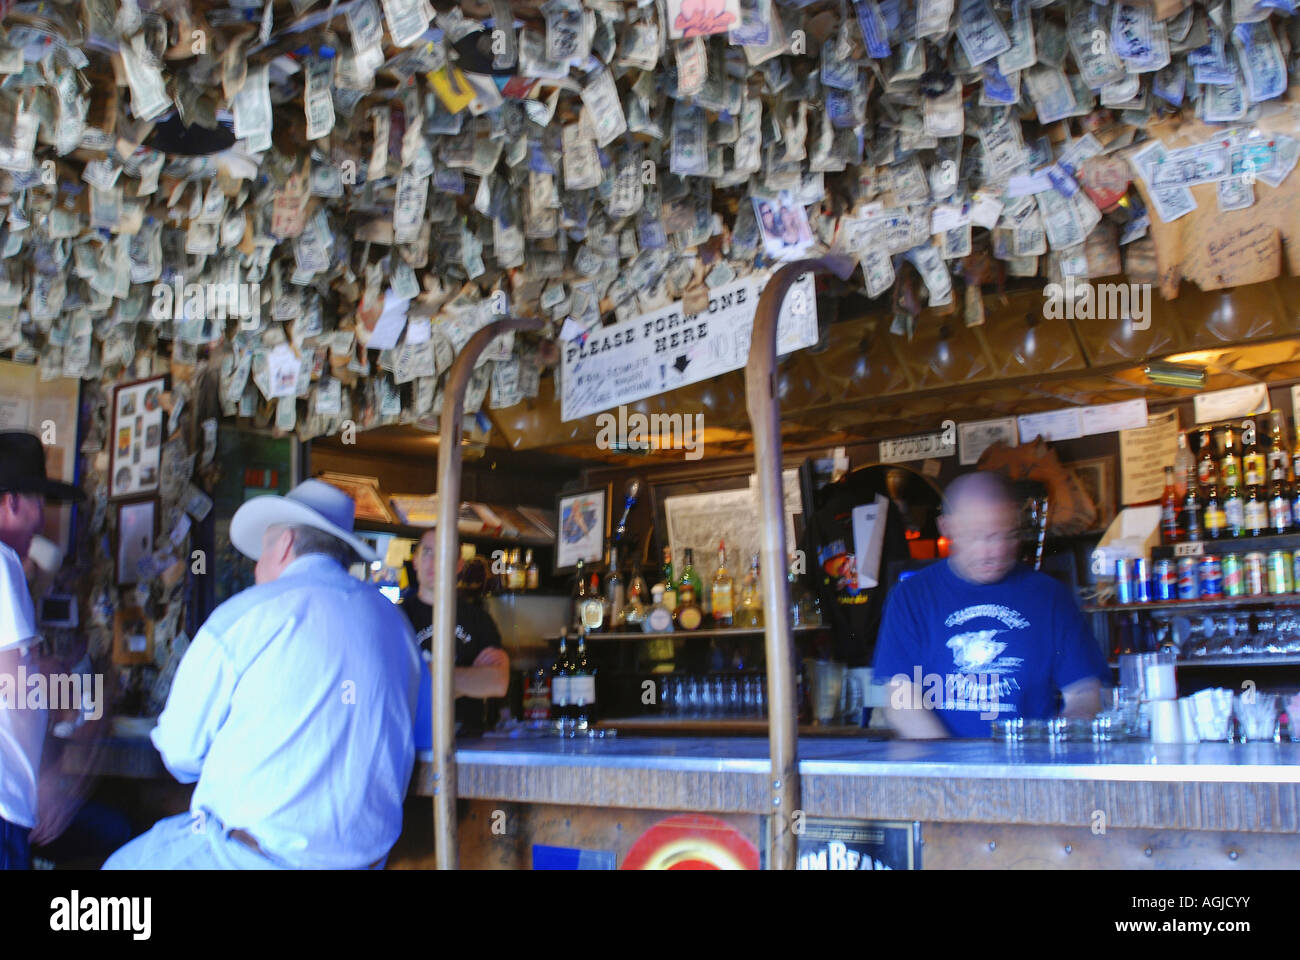 Painet jm7496 arizona scottsdale reata pass greasewood flat outdoor dining  bar eatery currencycovered ceiling affairs Stock Photo - Alamy